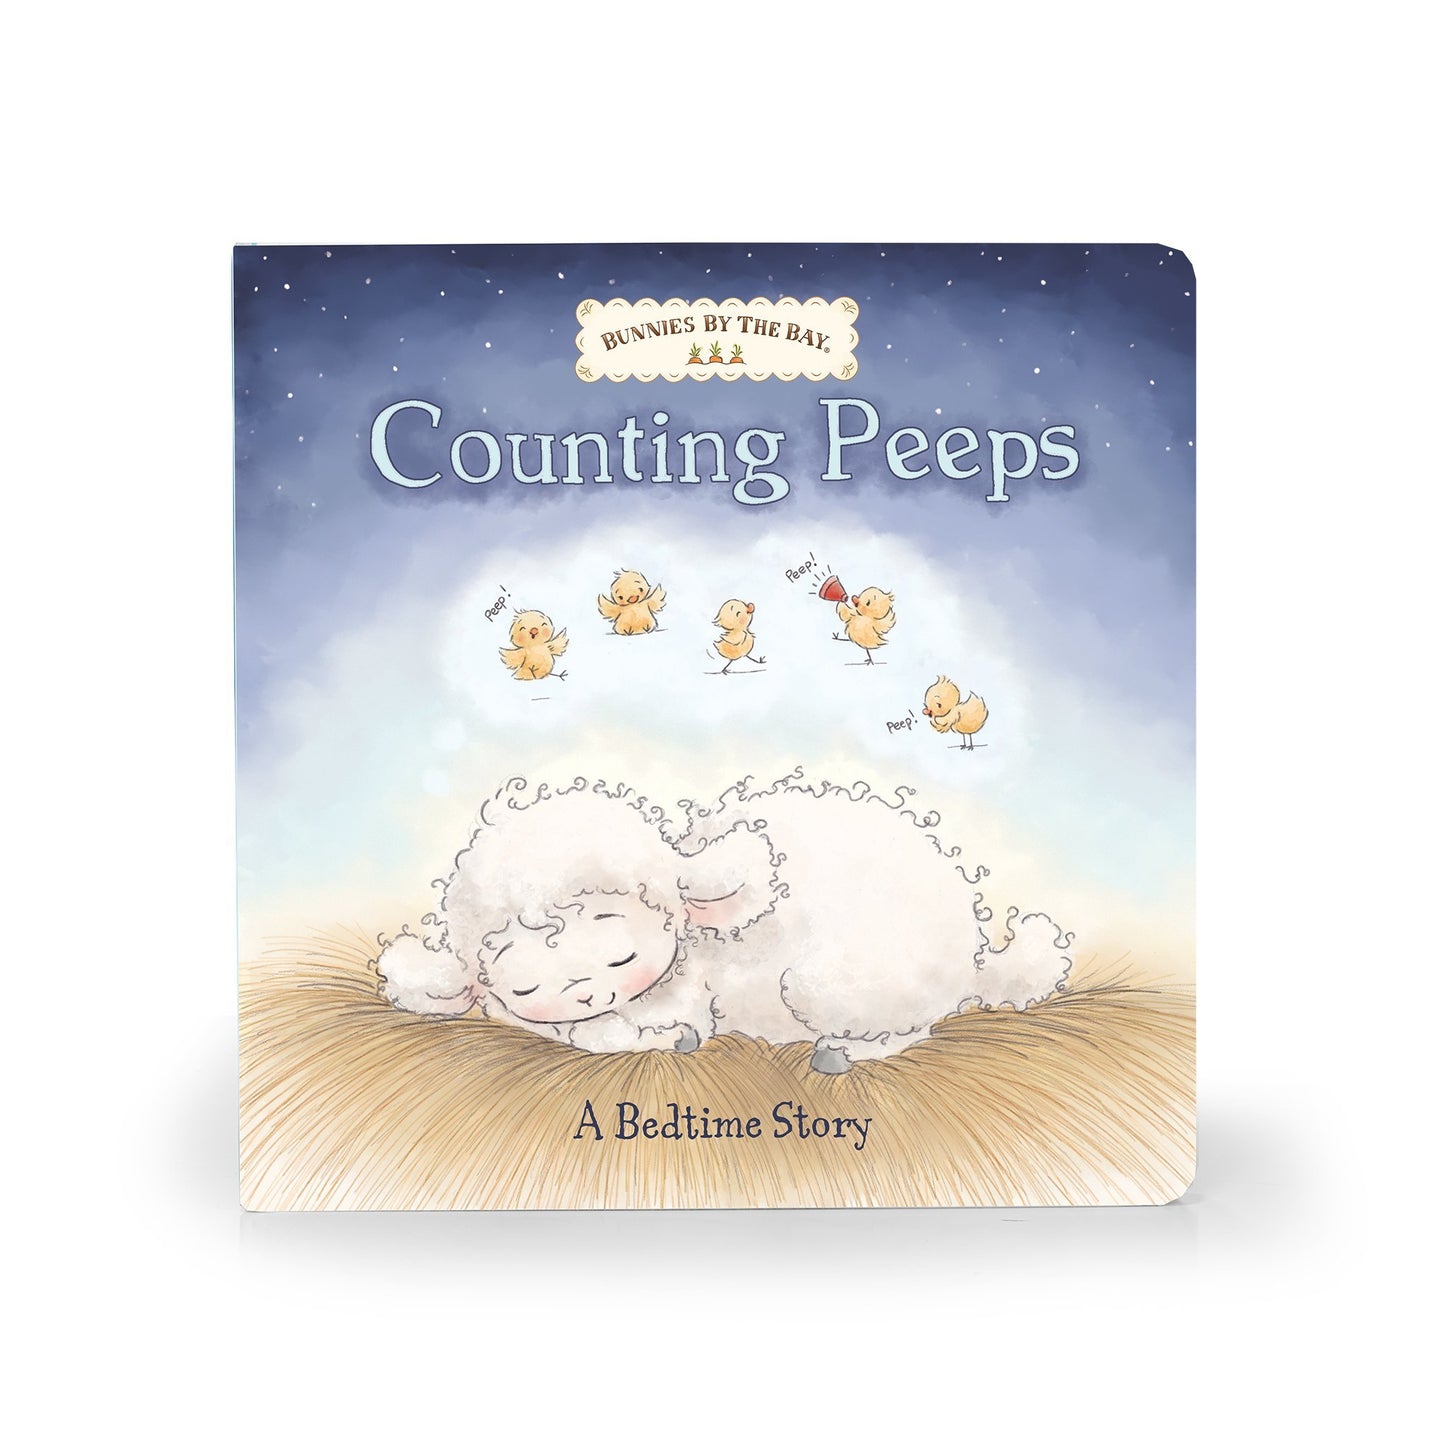 Counting Peeps board book